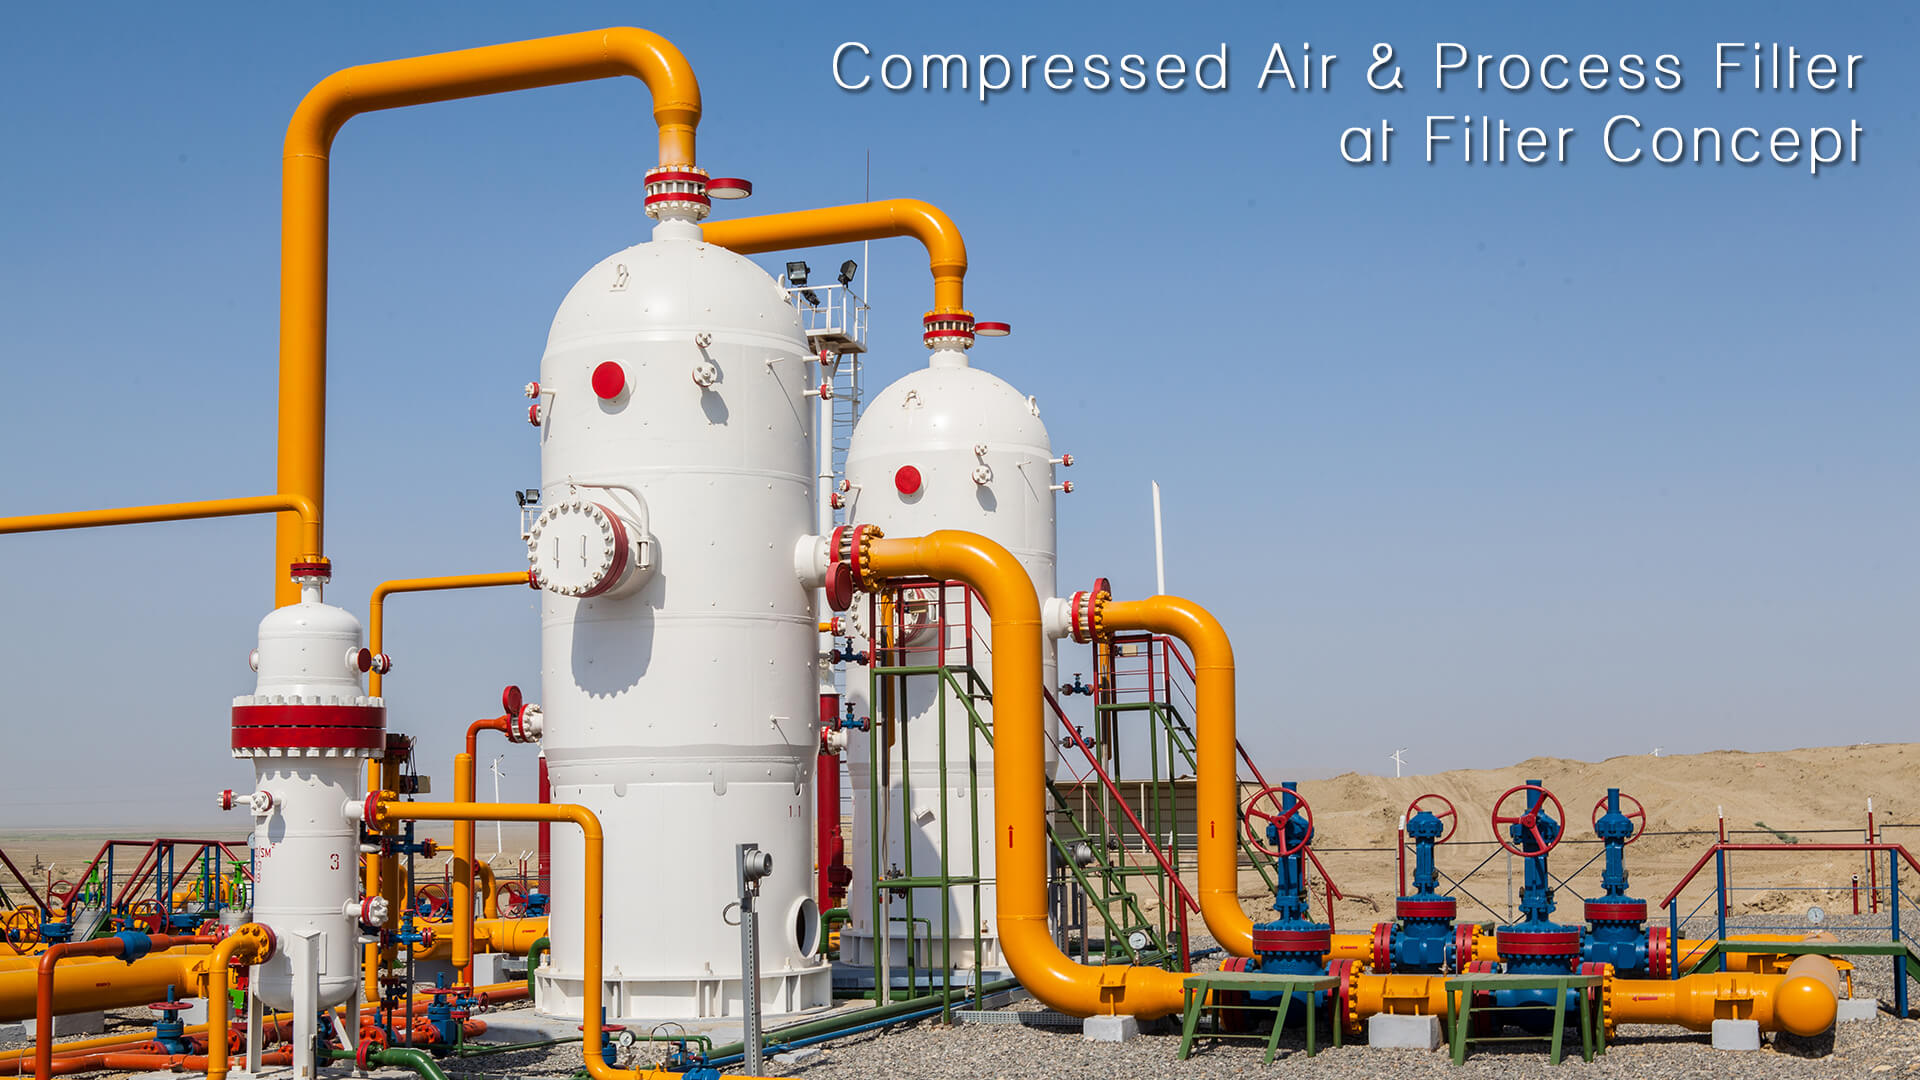 Compressed Air & Process Filter at Filter Concept